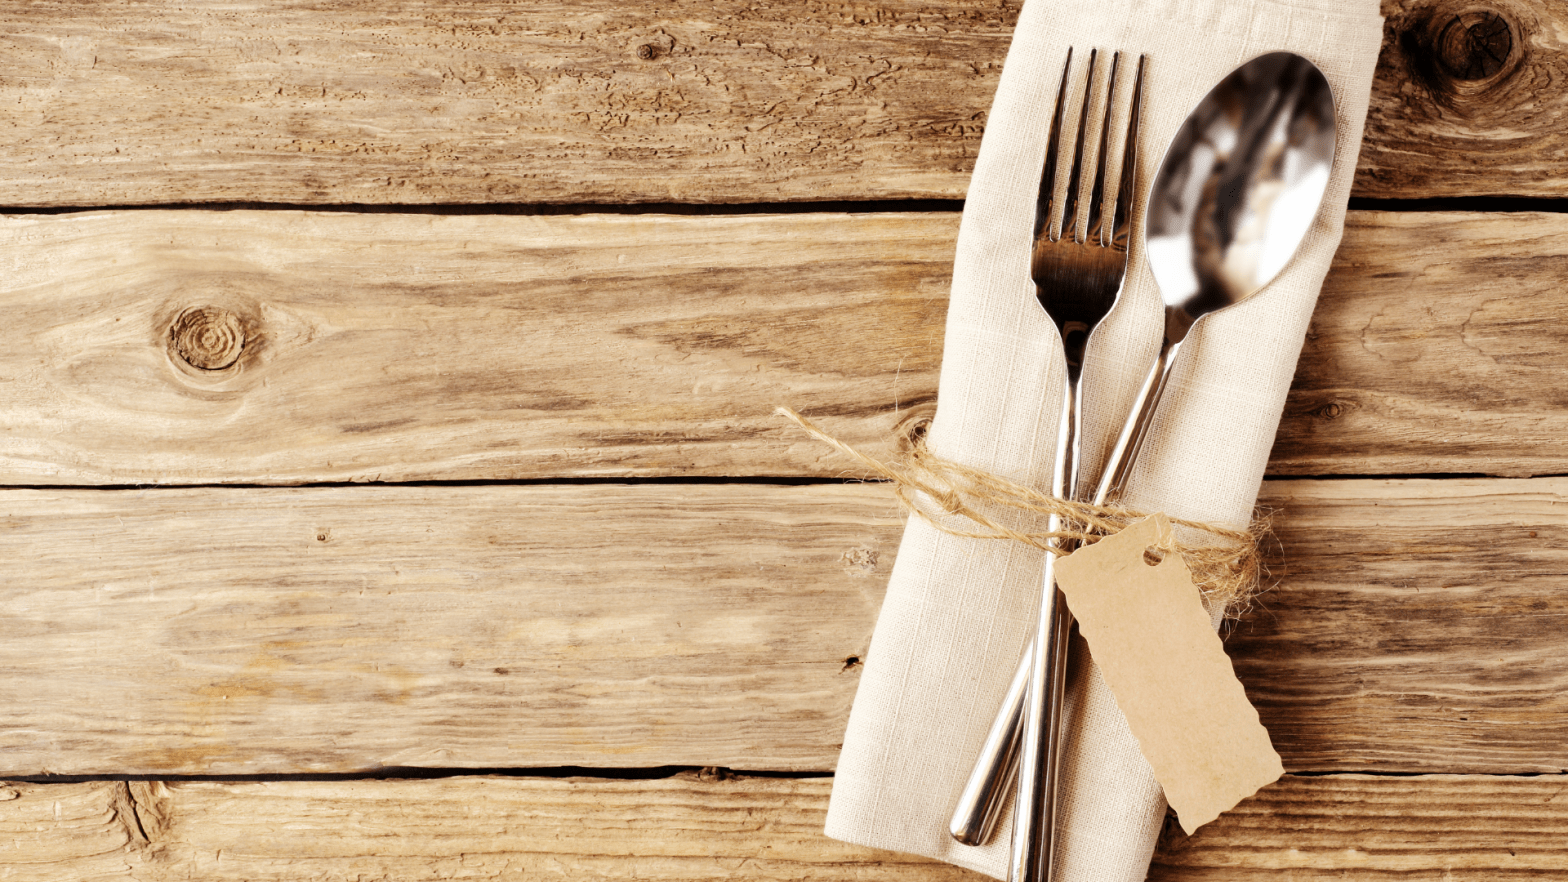 How the ‘Spoon’ and ‘Fork’ Theories Can Make You More Compassionate to Yourself (and Others)